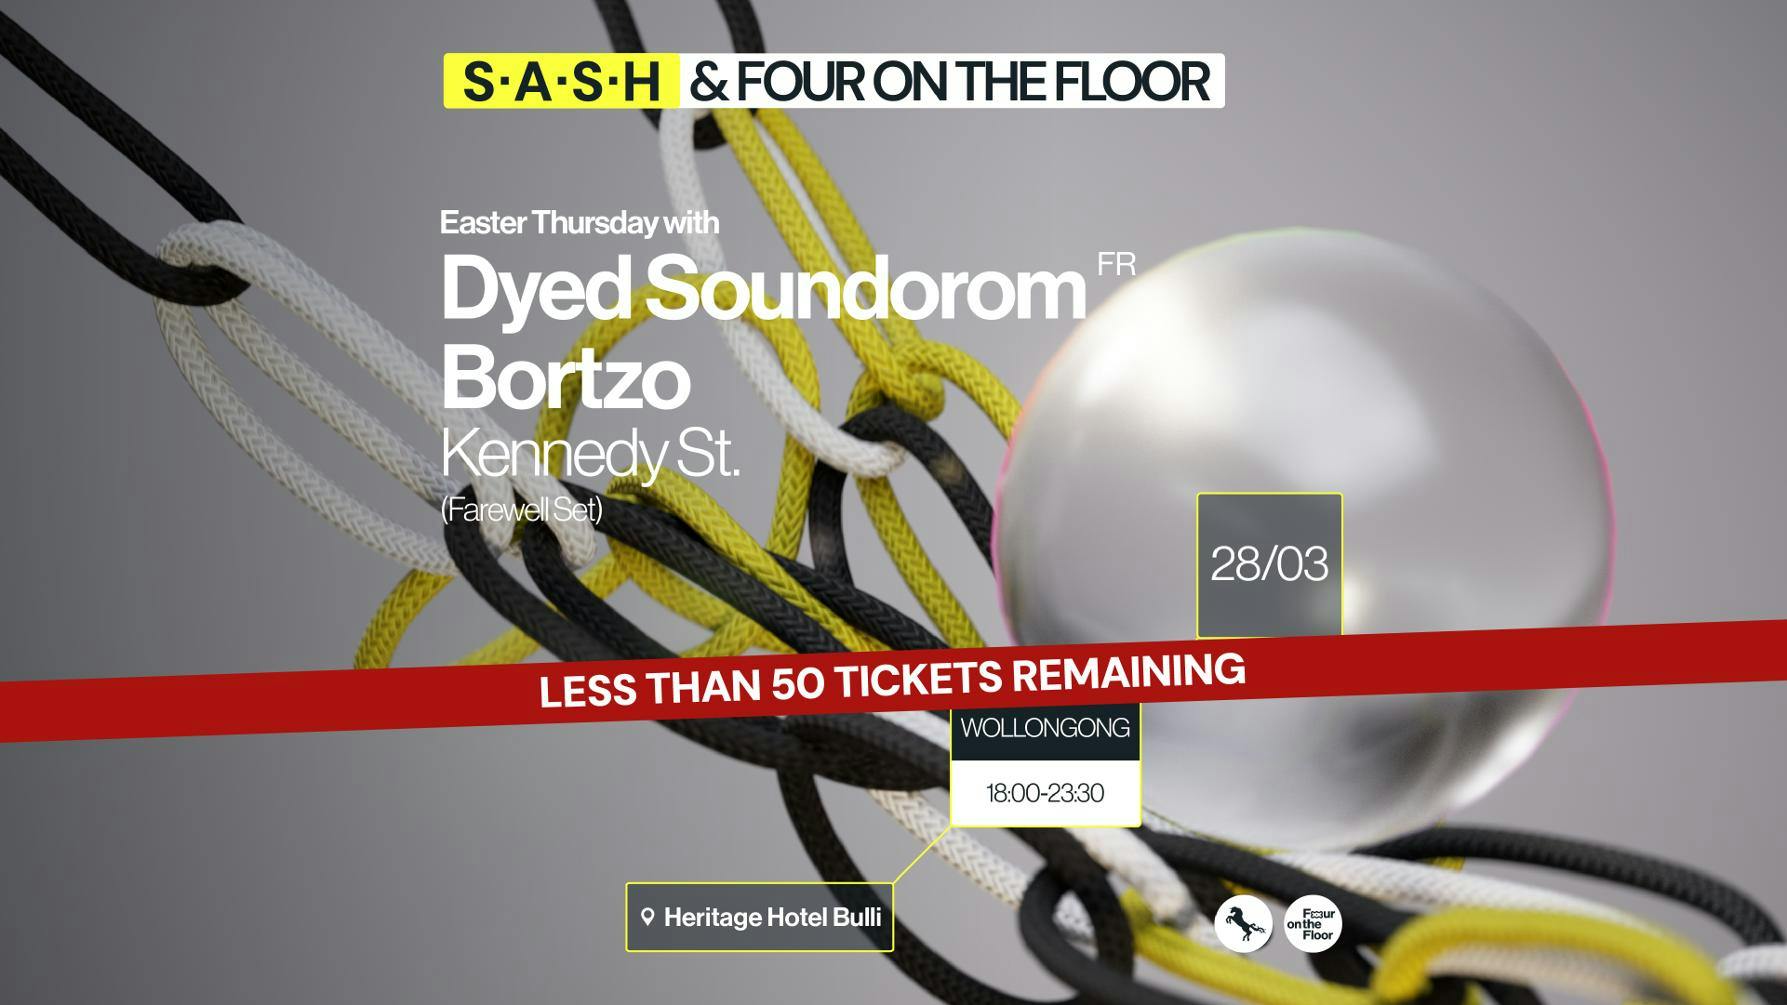 ★ S.A.S.H Wollongong & Four On The Floor ★ Dyed Soundorom ★ Bortzo ★ Thursday 28th March ★